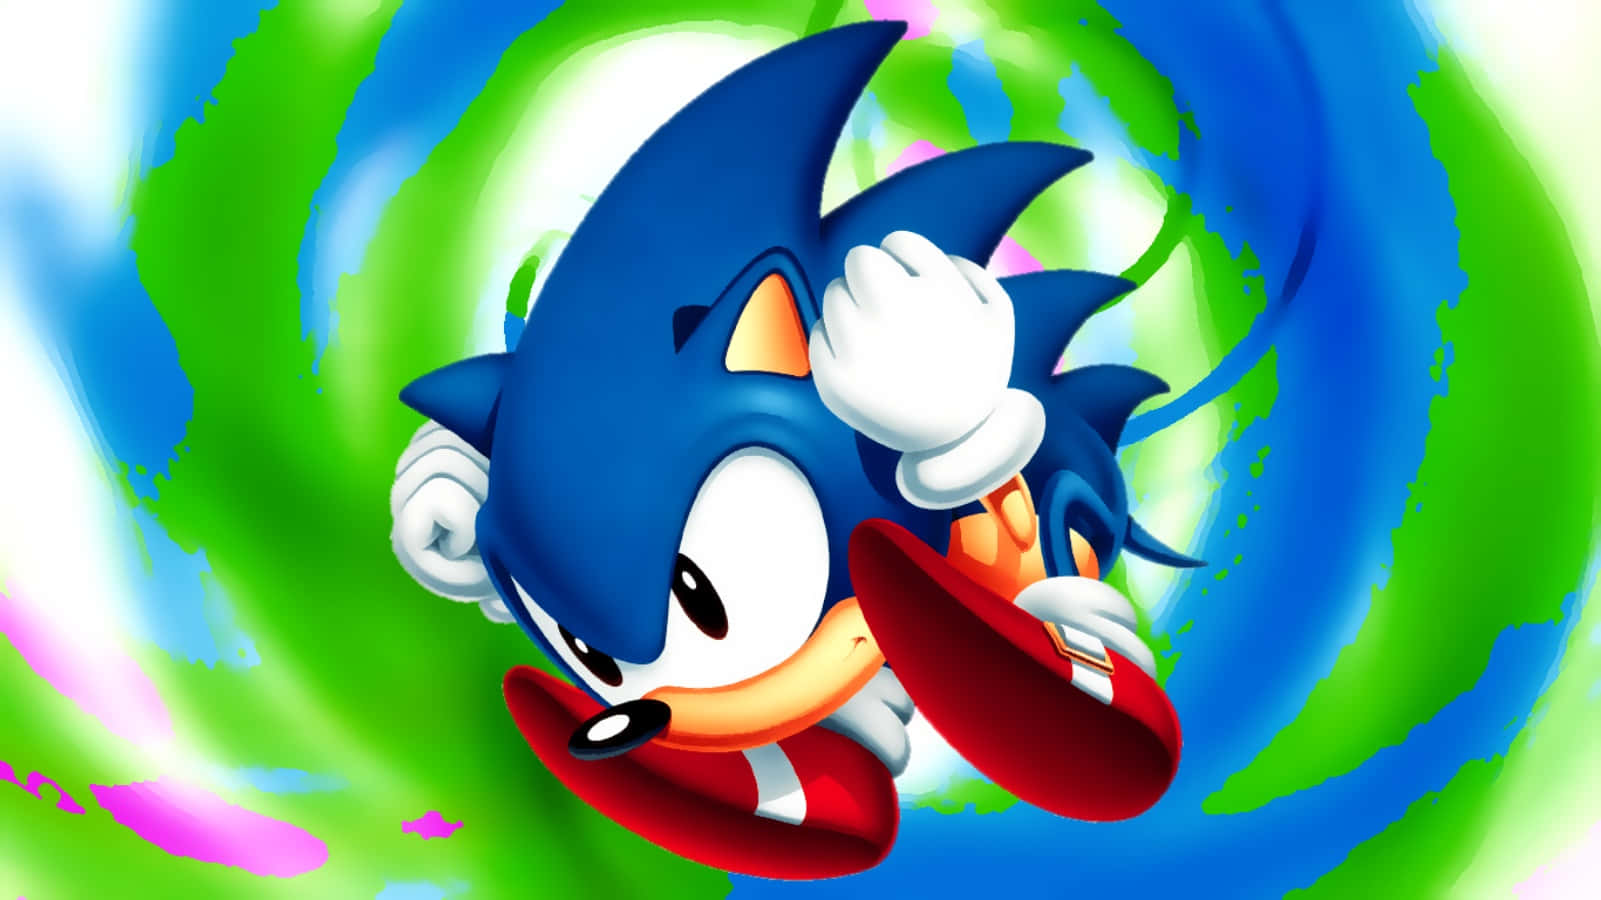 Sonic The Hedgehog In A Colorful Swirl